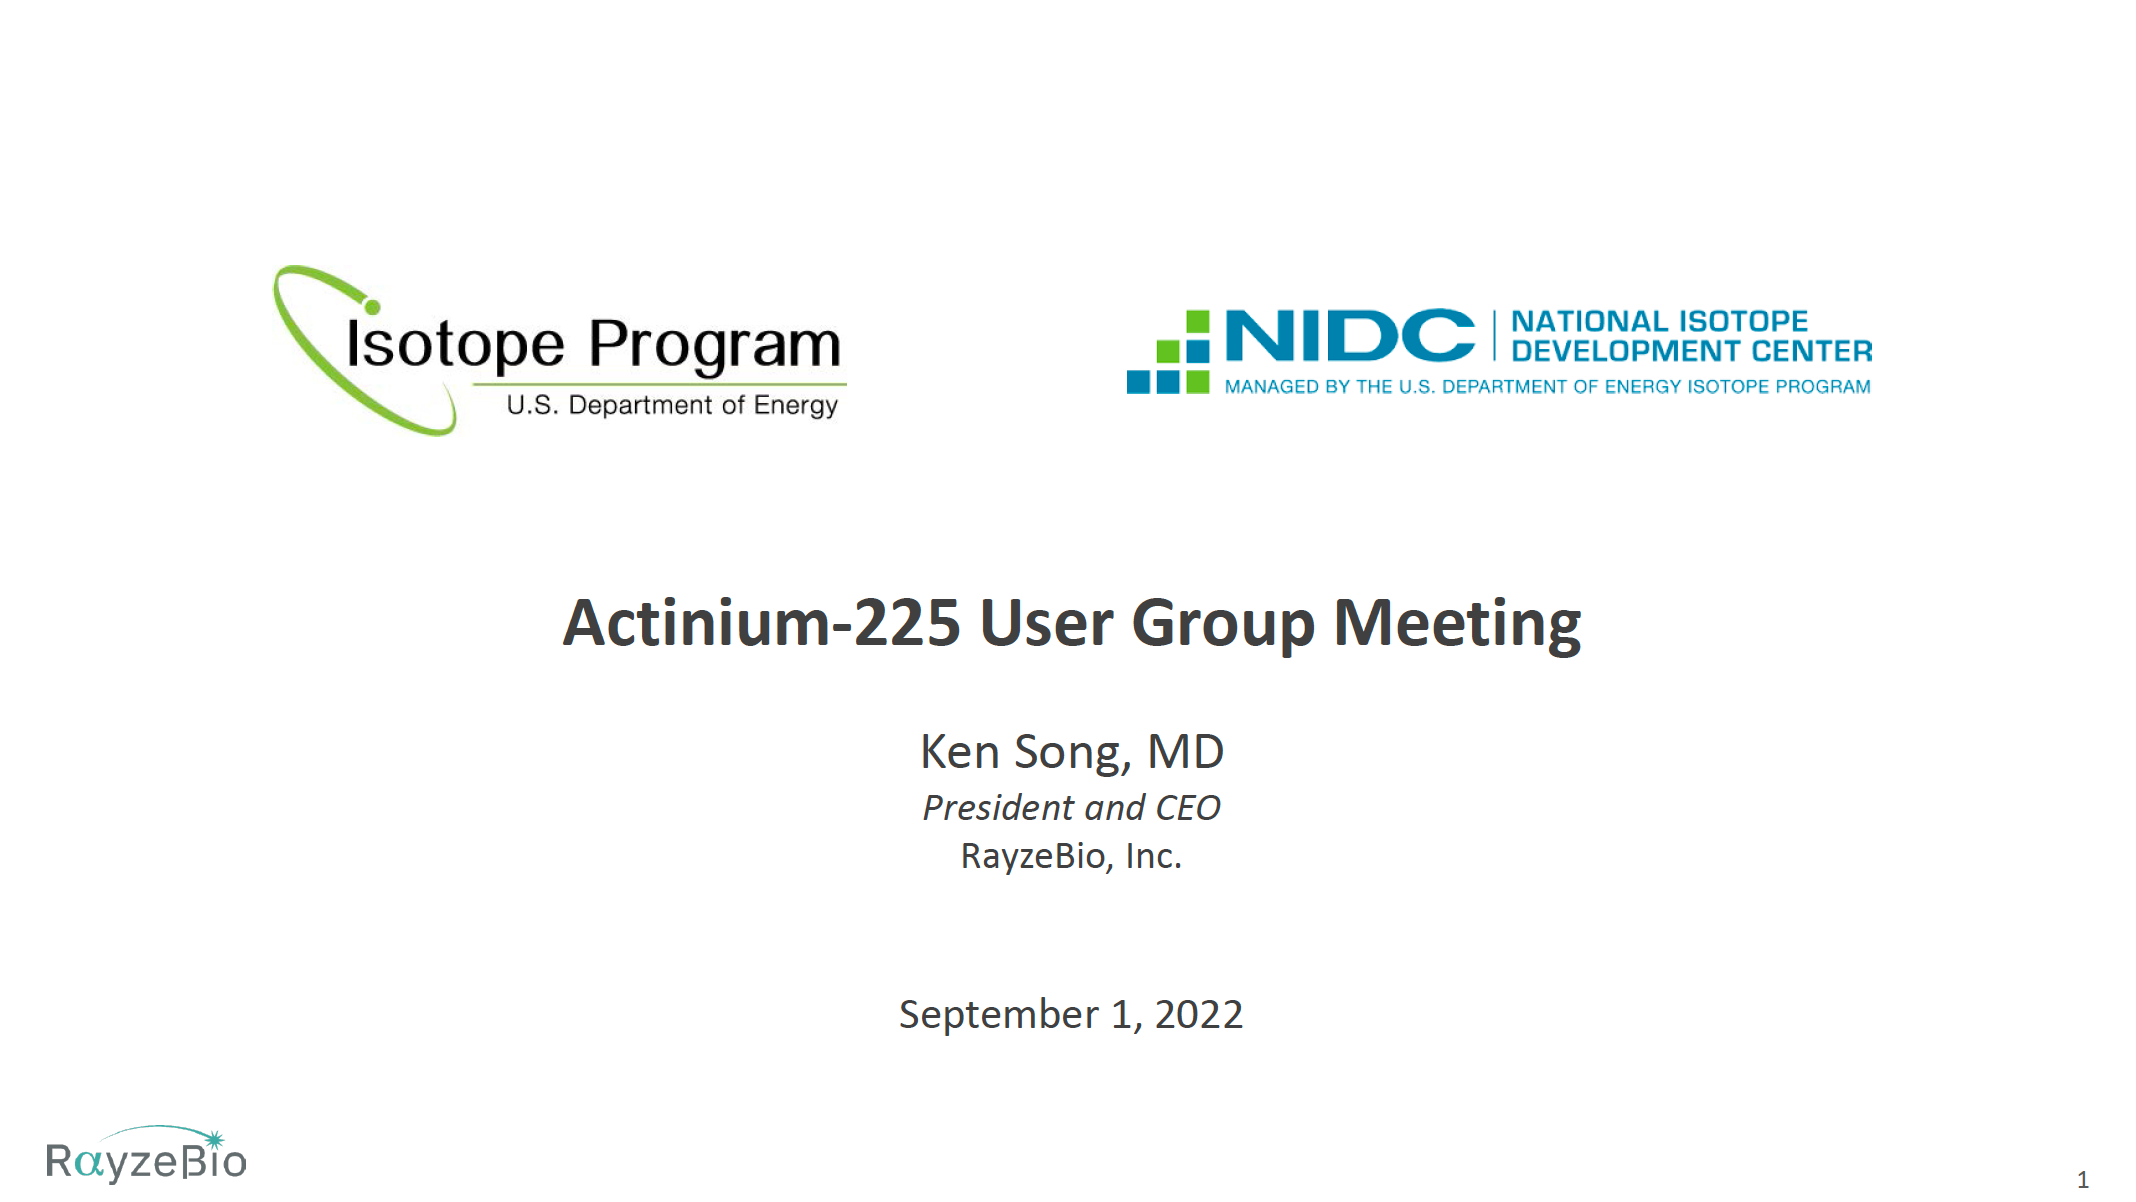 Actinium-225 User Group Meeting by Ken Song M.D., RayzeBio